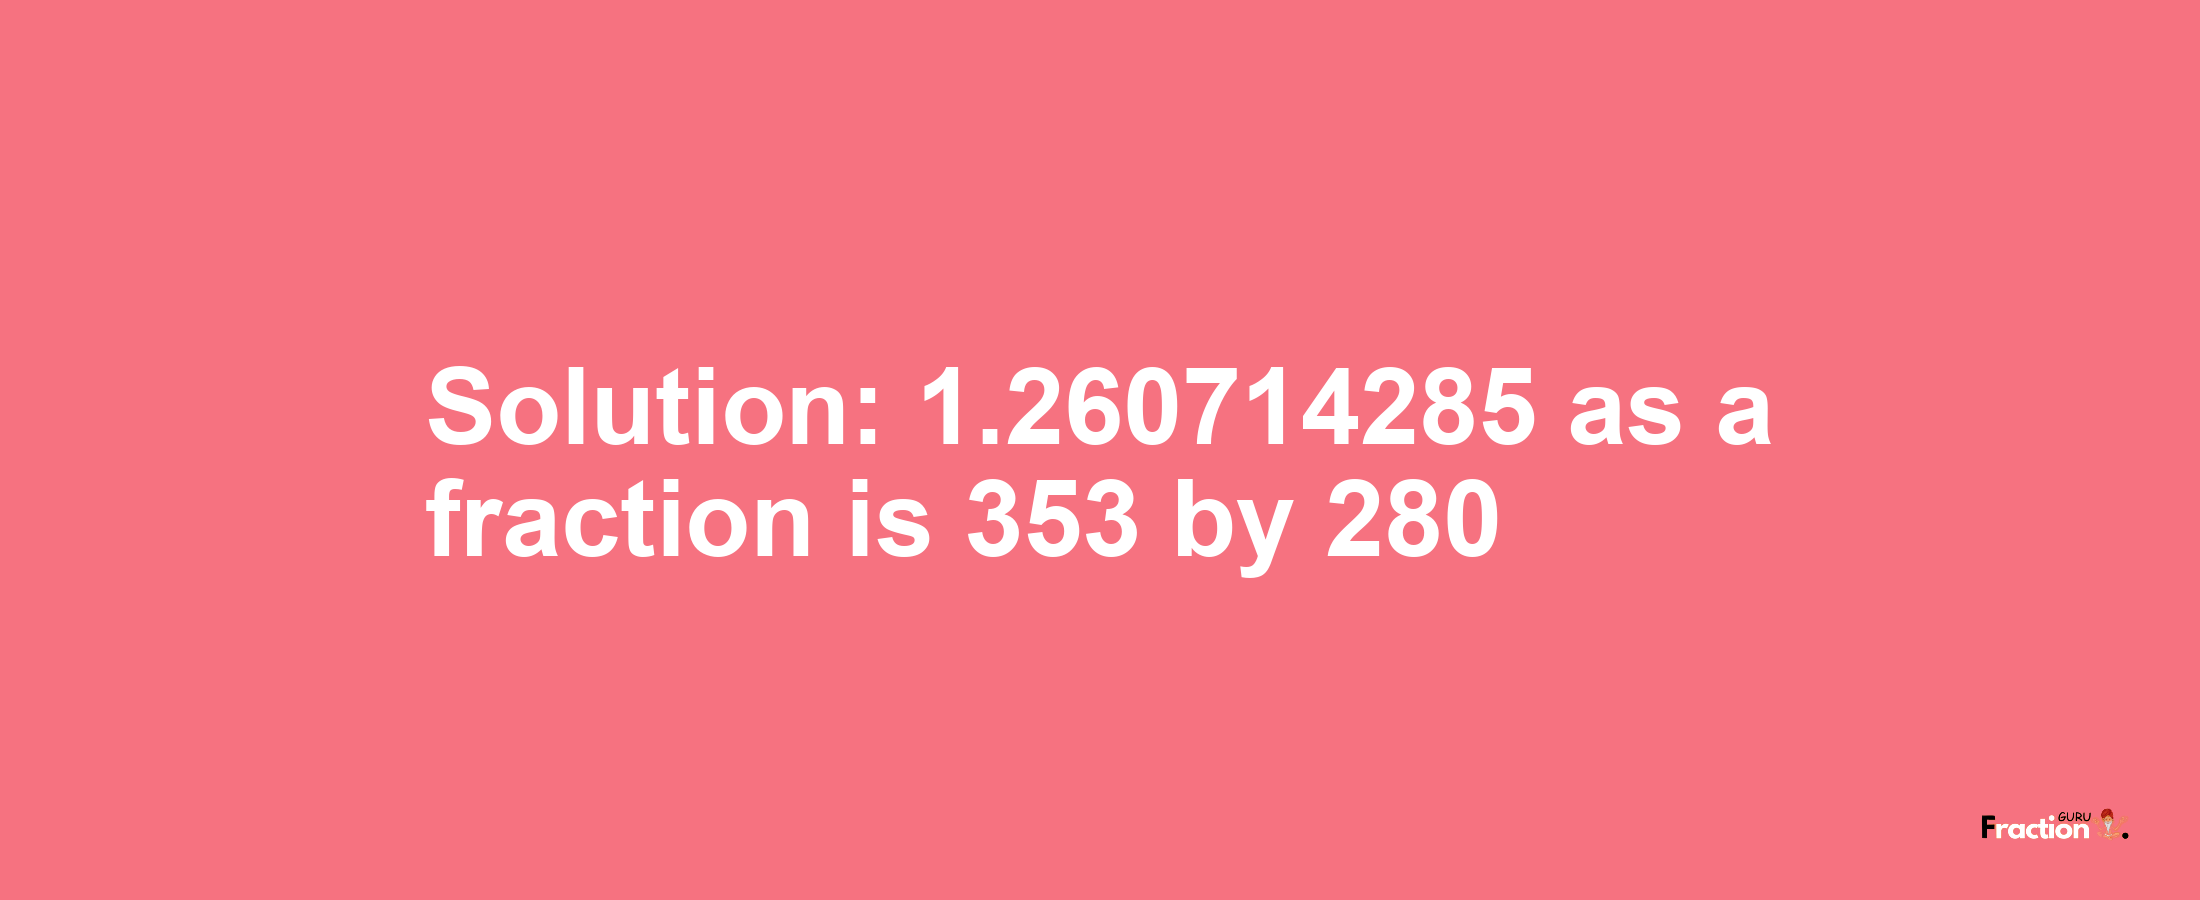 Solution:1.260714285 as a fraction is 353/280